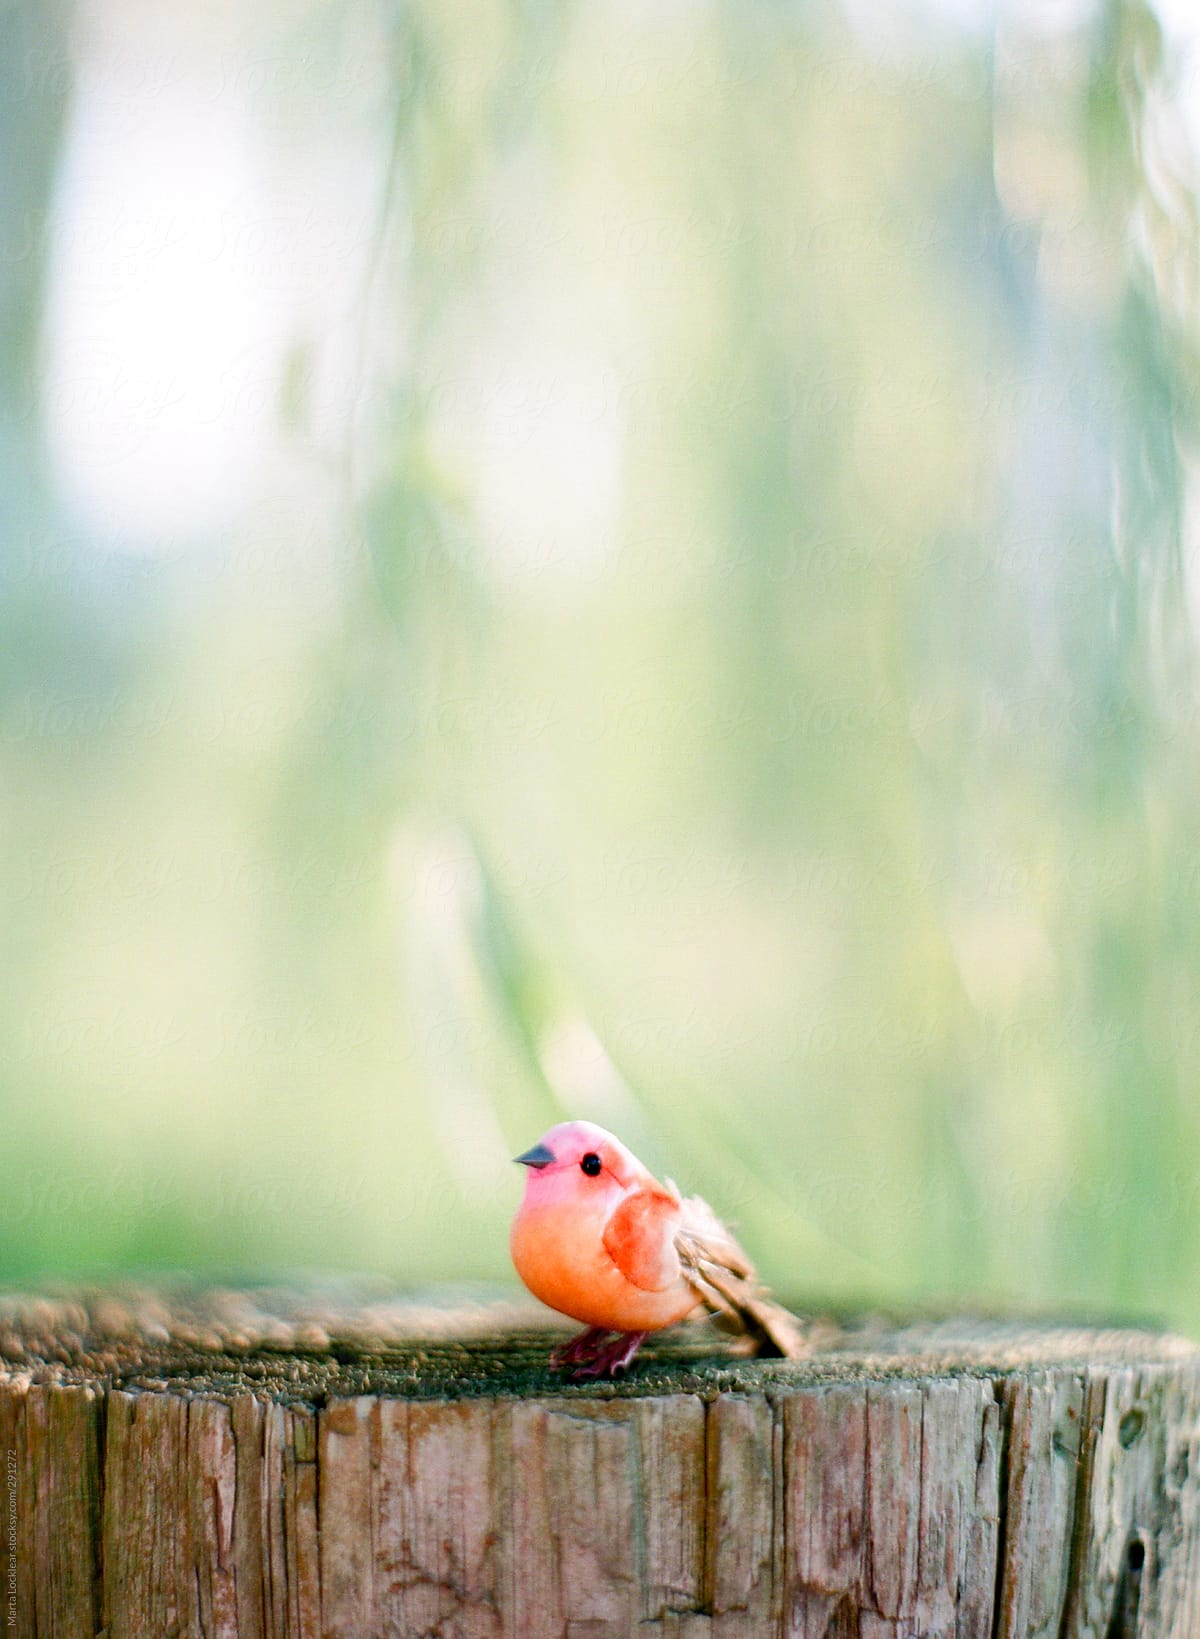 Small colorful bird sitting on top of a wooden post